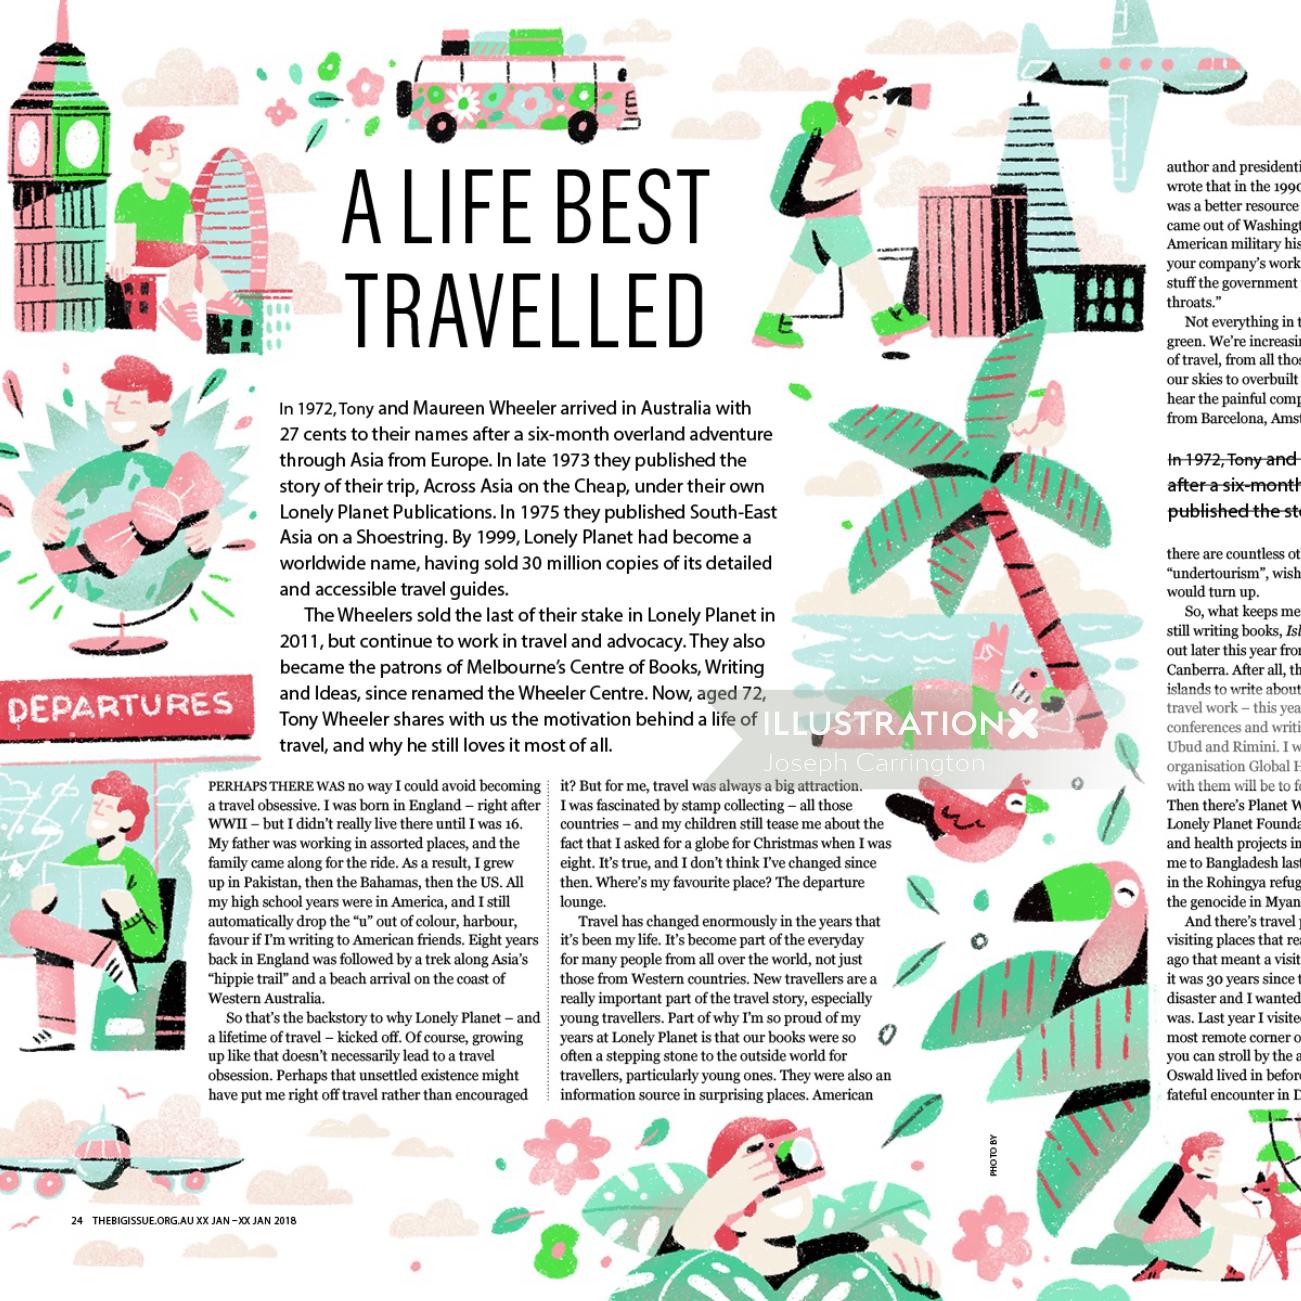 Lettering A life best travelled
